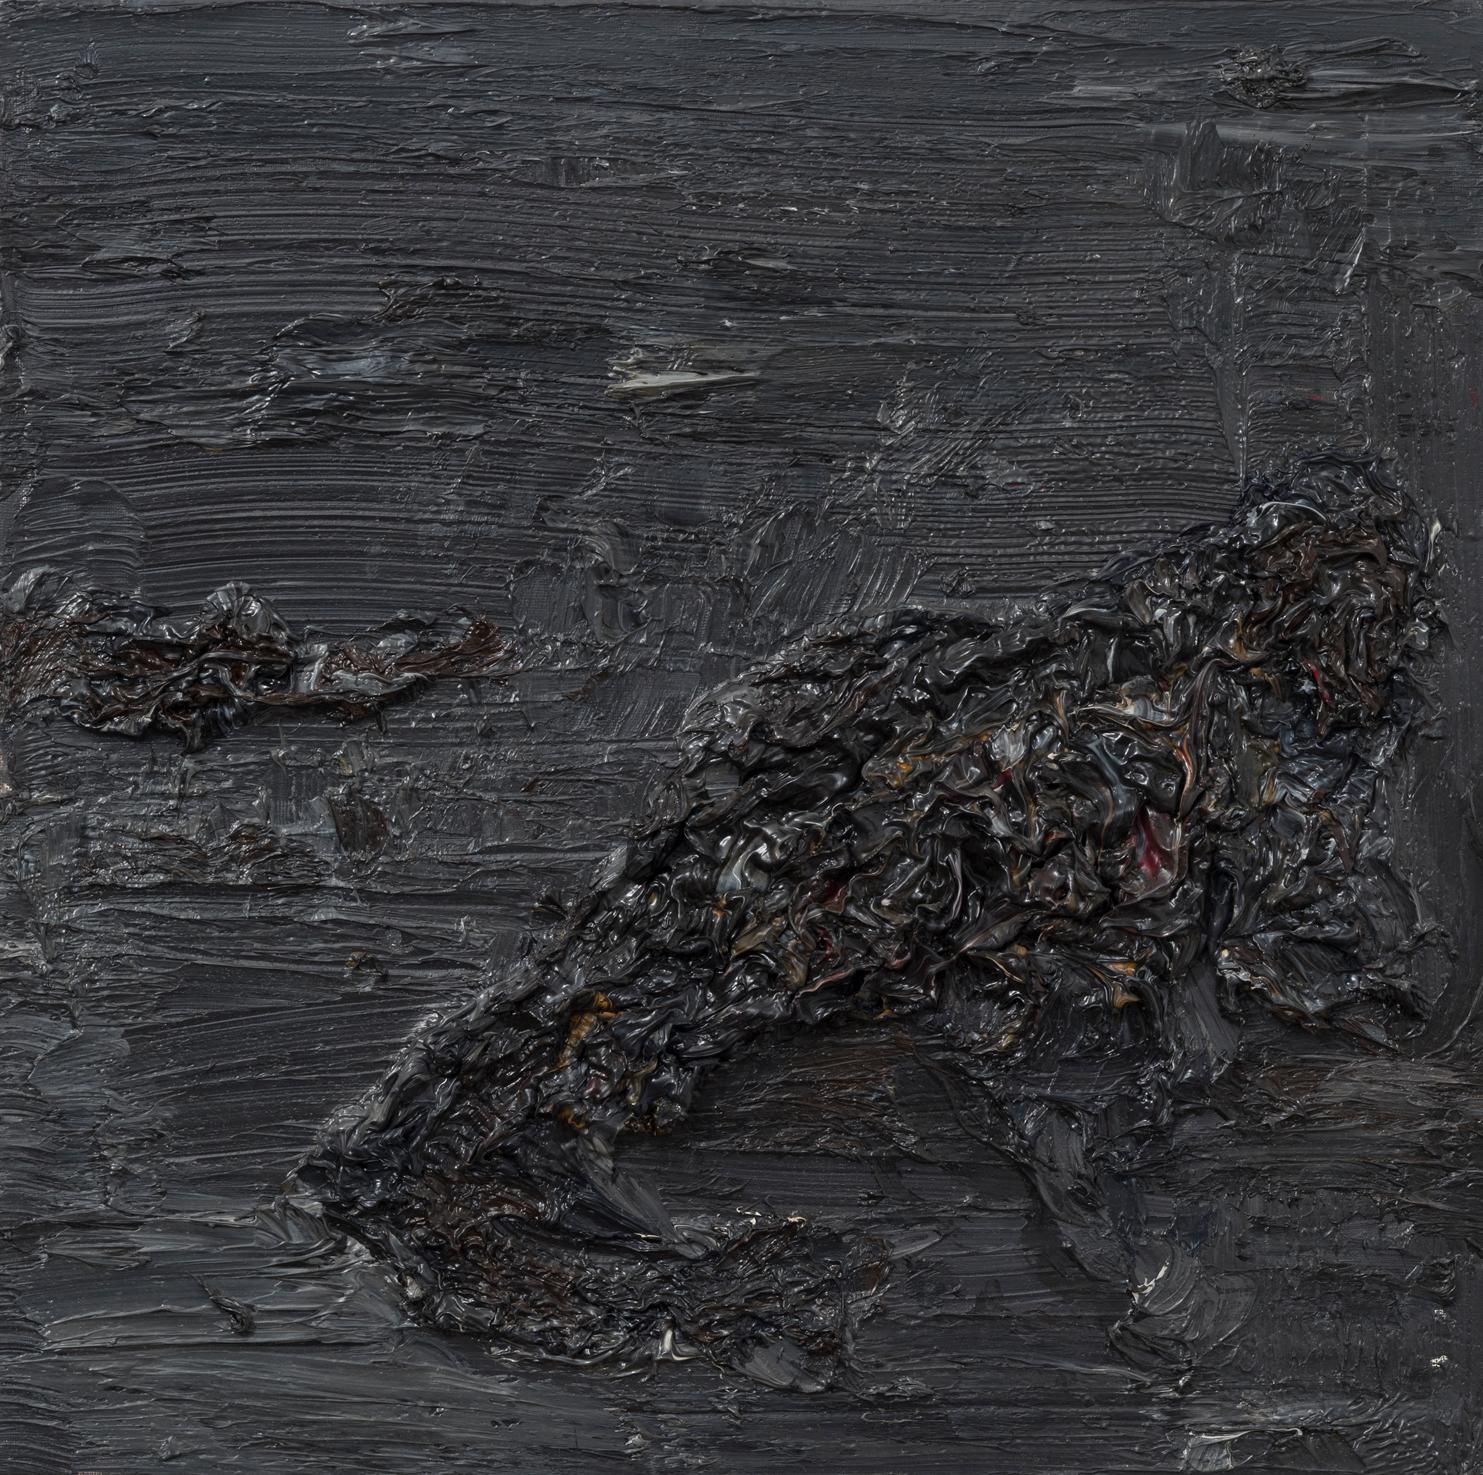 Untitled (Decomposition) - Contemporary, Abstract, Black, Dark Gray, Organic